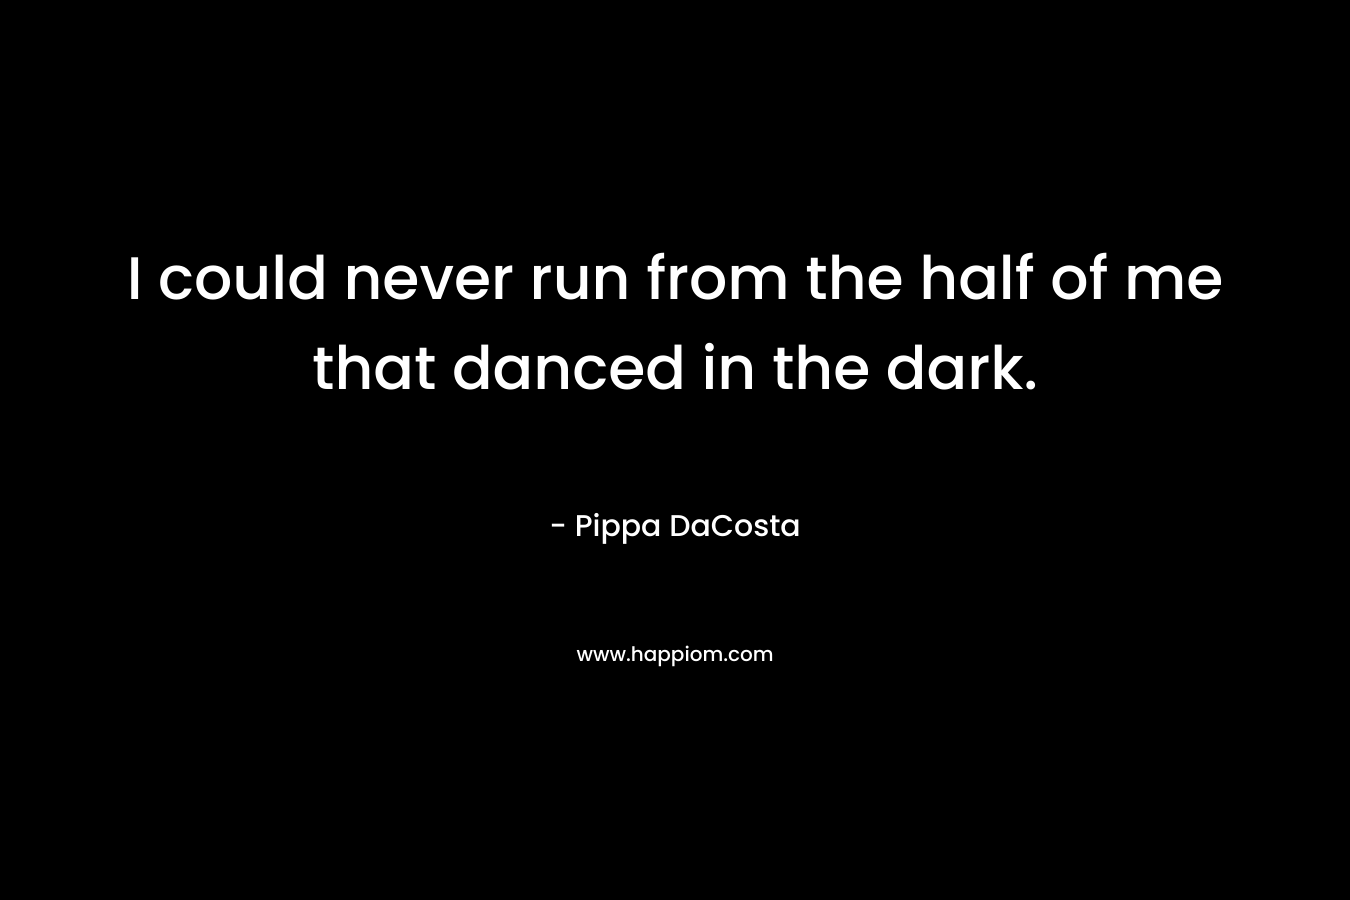 I could never run from the half of me that danced in the dark. – Pippa DaCosta